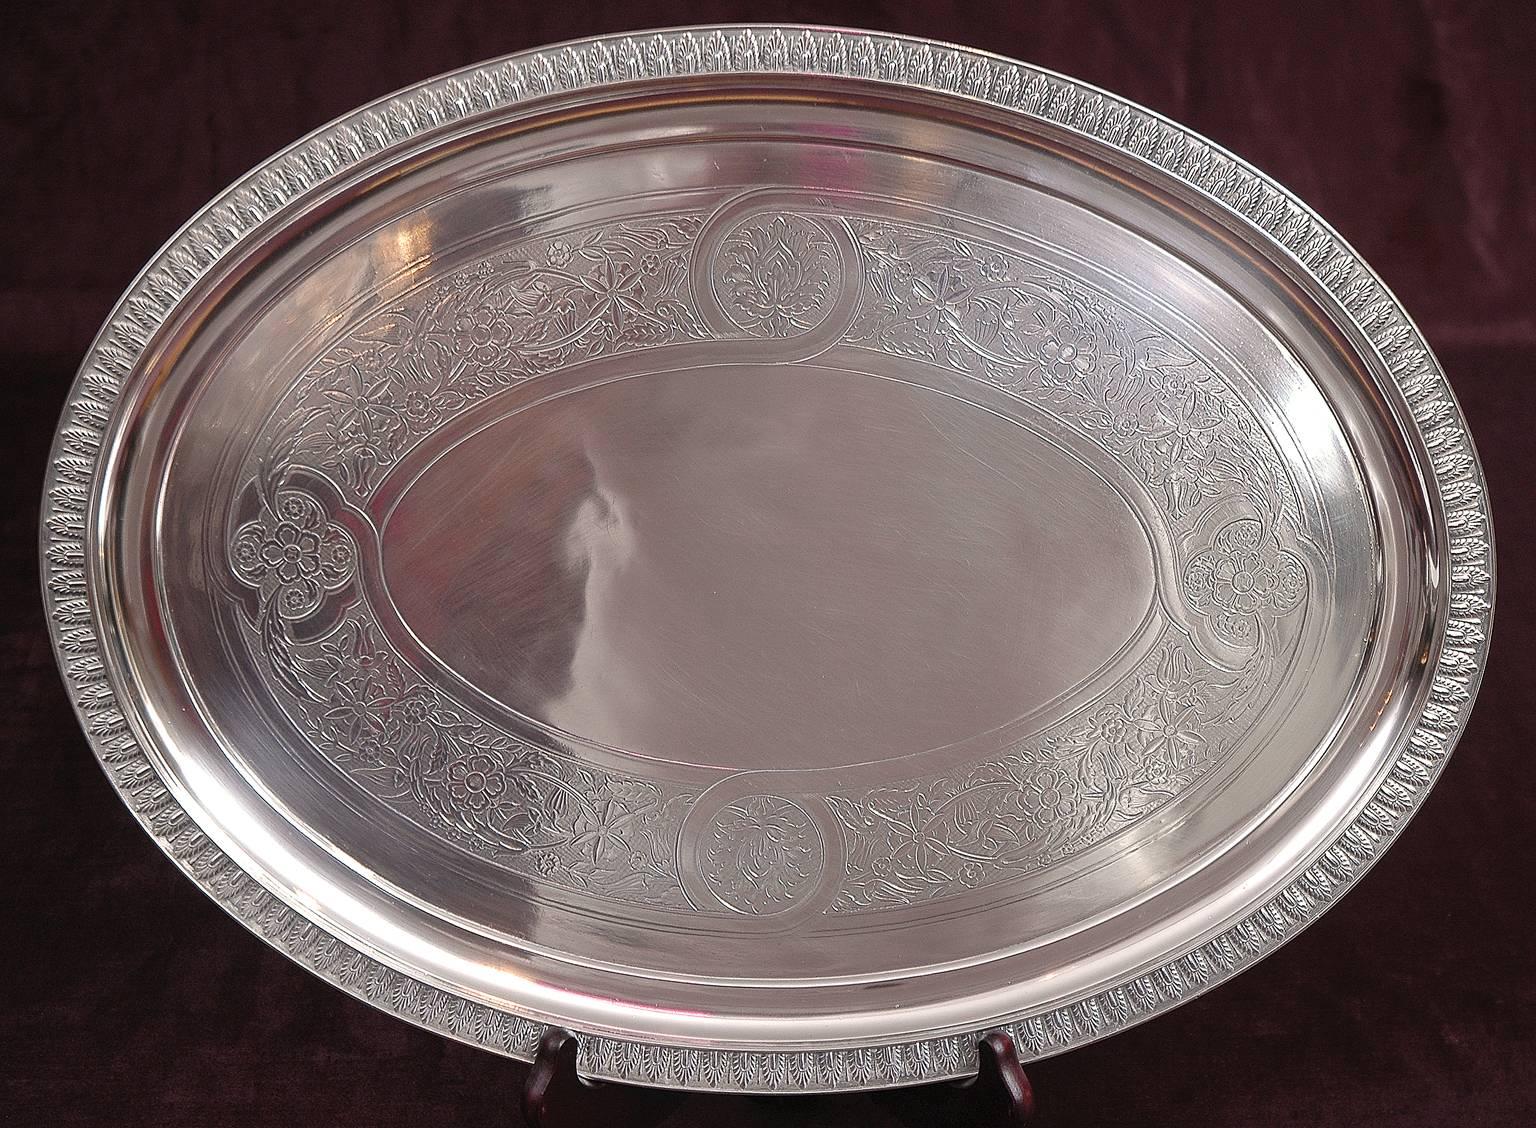 This lovely sliver plate Tiffany tray was fabricated for commercial use in 1957. Palmette design decorates border, with floral design in banding along center.

Measures: 18